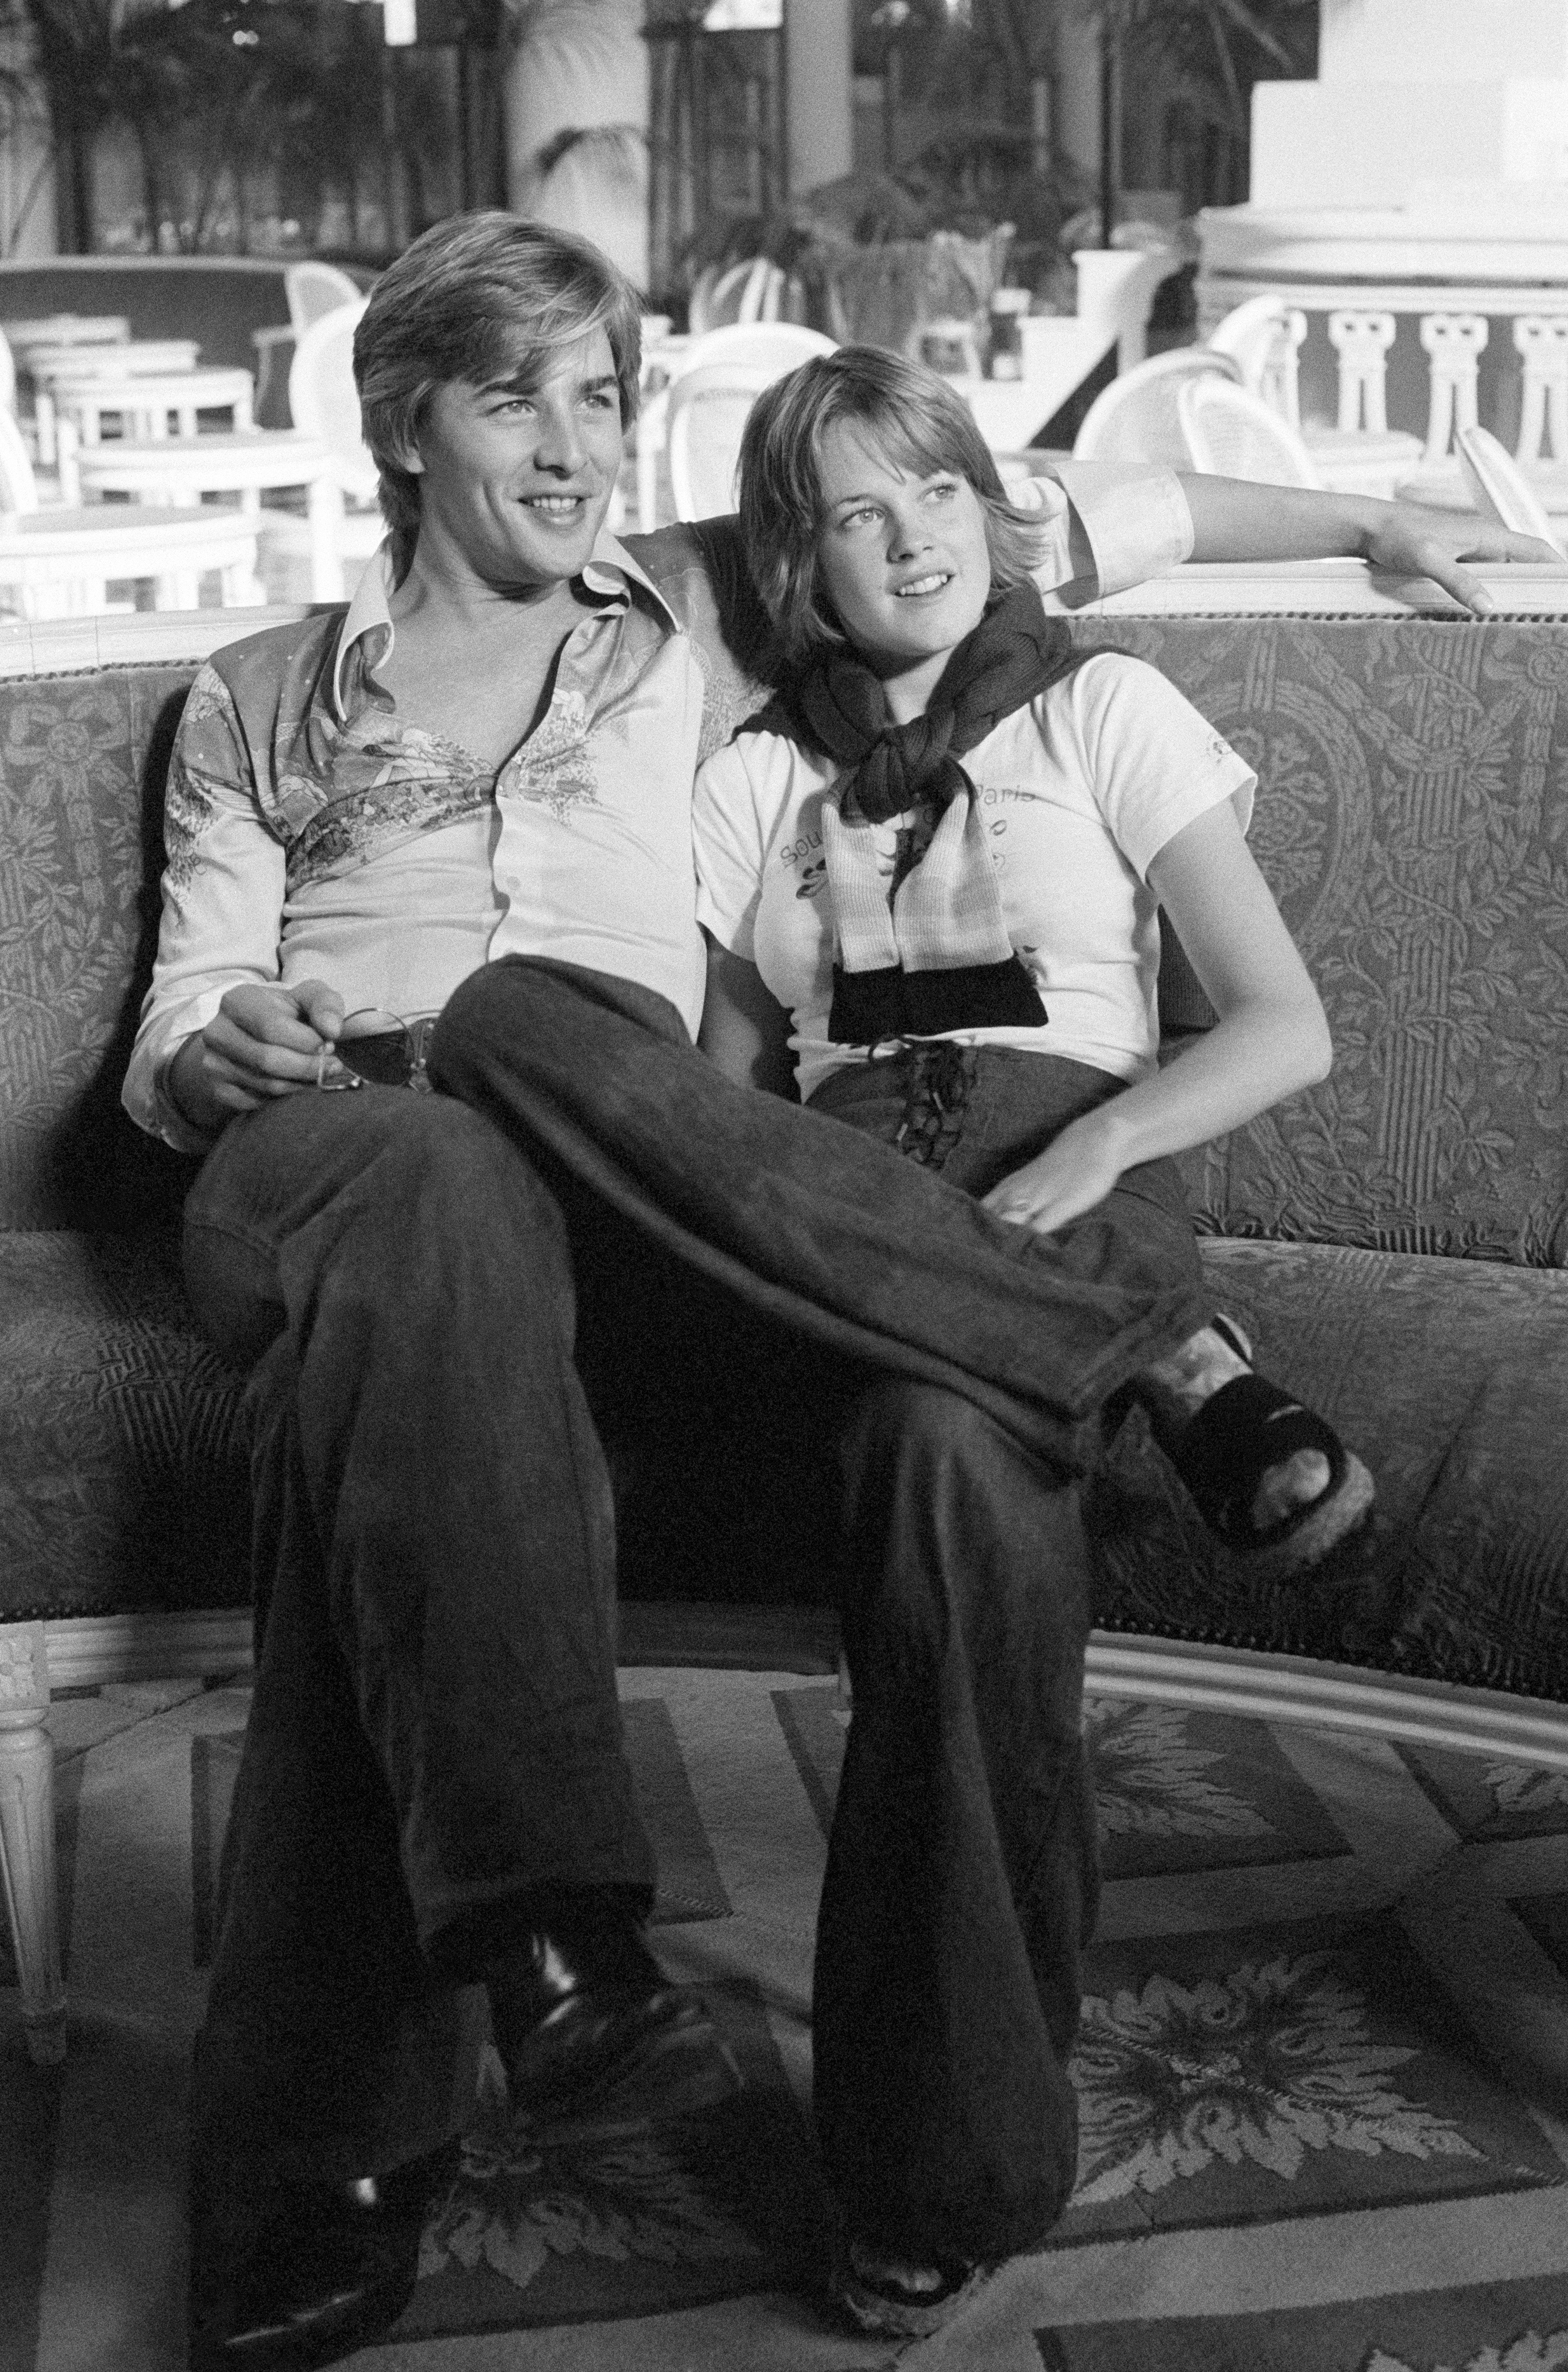 Two people sitting casually, smiling, with one&#x27;s arm around the other. They wear vintage style casual clothing